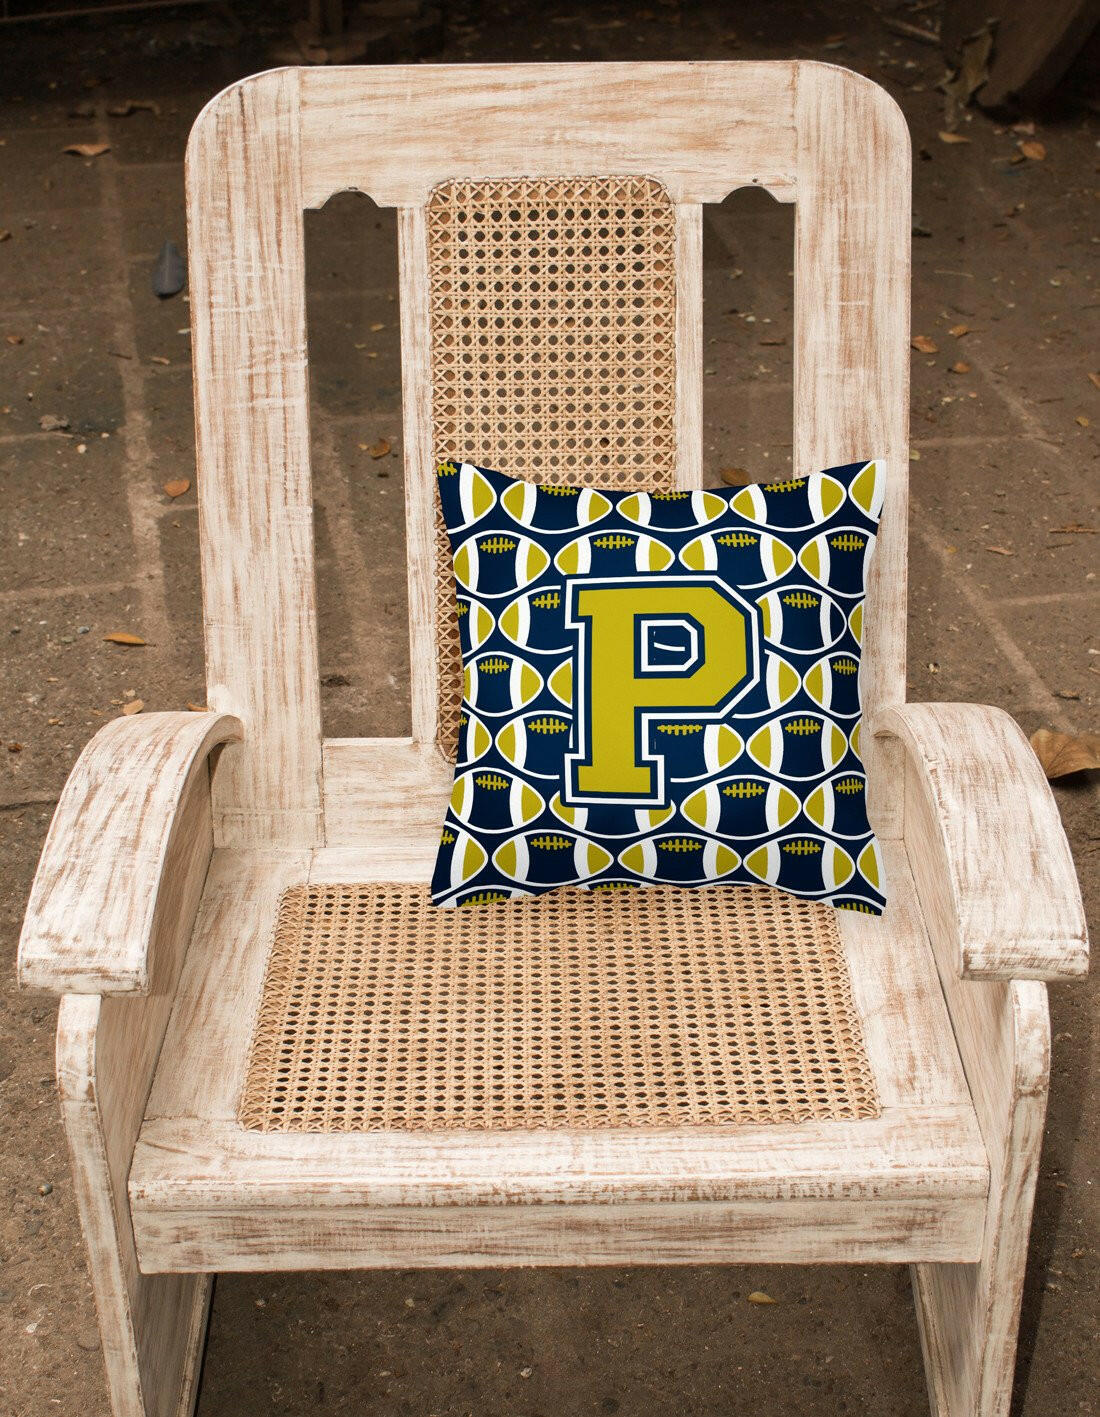 Letter P Football Blue and Gold Fabric Decorative Pillow CJ1074-PPW1414 by Caroline's Treasures